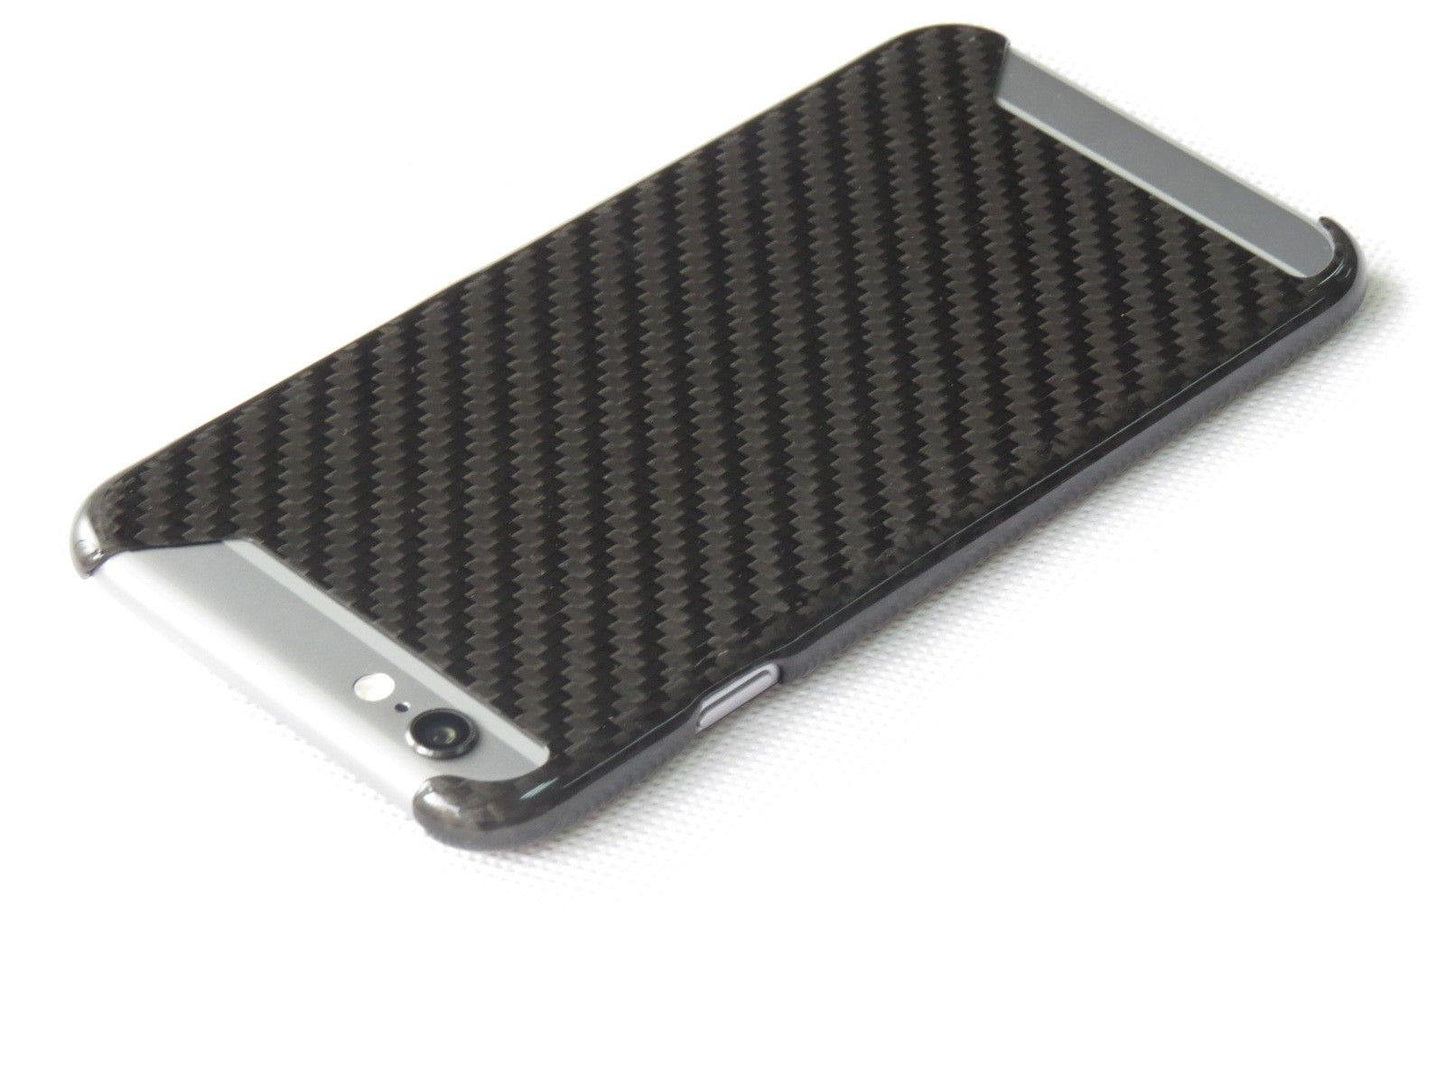 Deluxe Real Pure Carbon Fiber Matte Glossy Case Cover for iPhone 6 with 4.7 inch " - Pinalloy Online Auto Accessories Lightweight Car Kit 